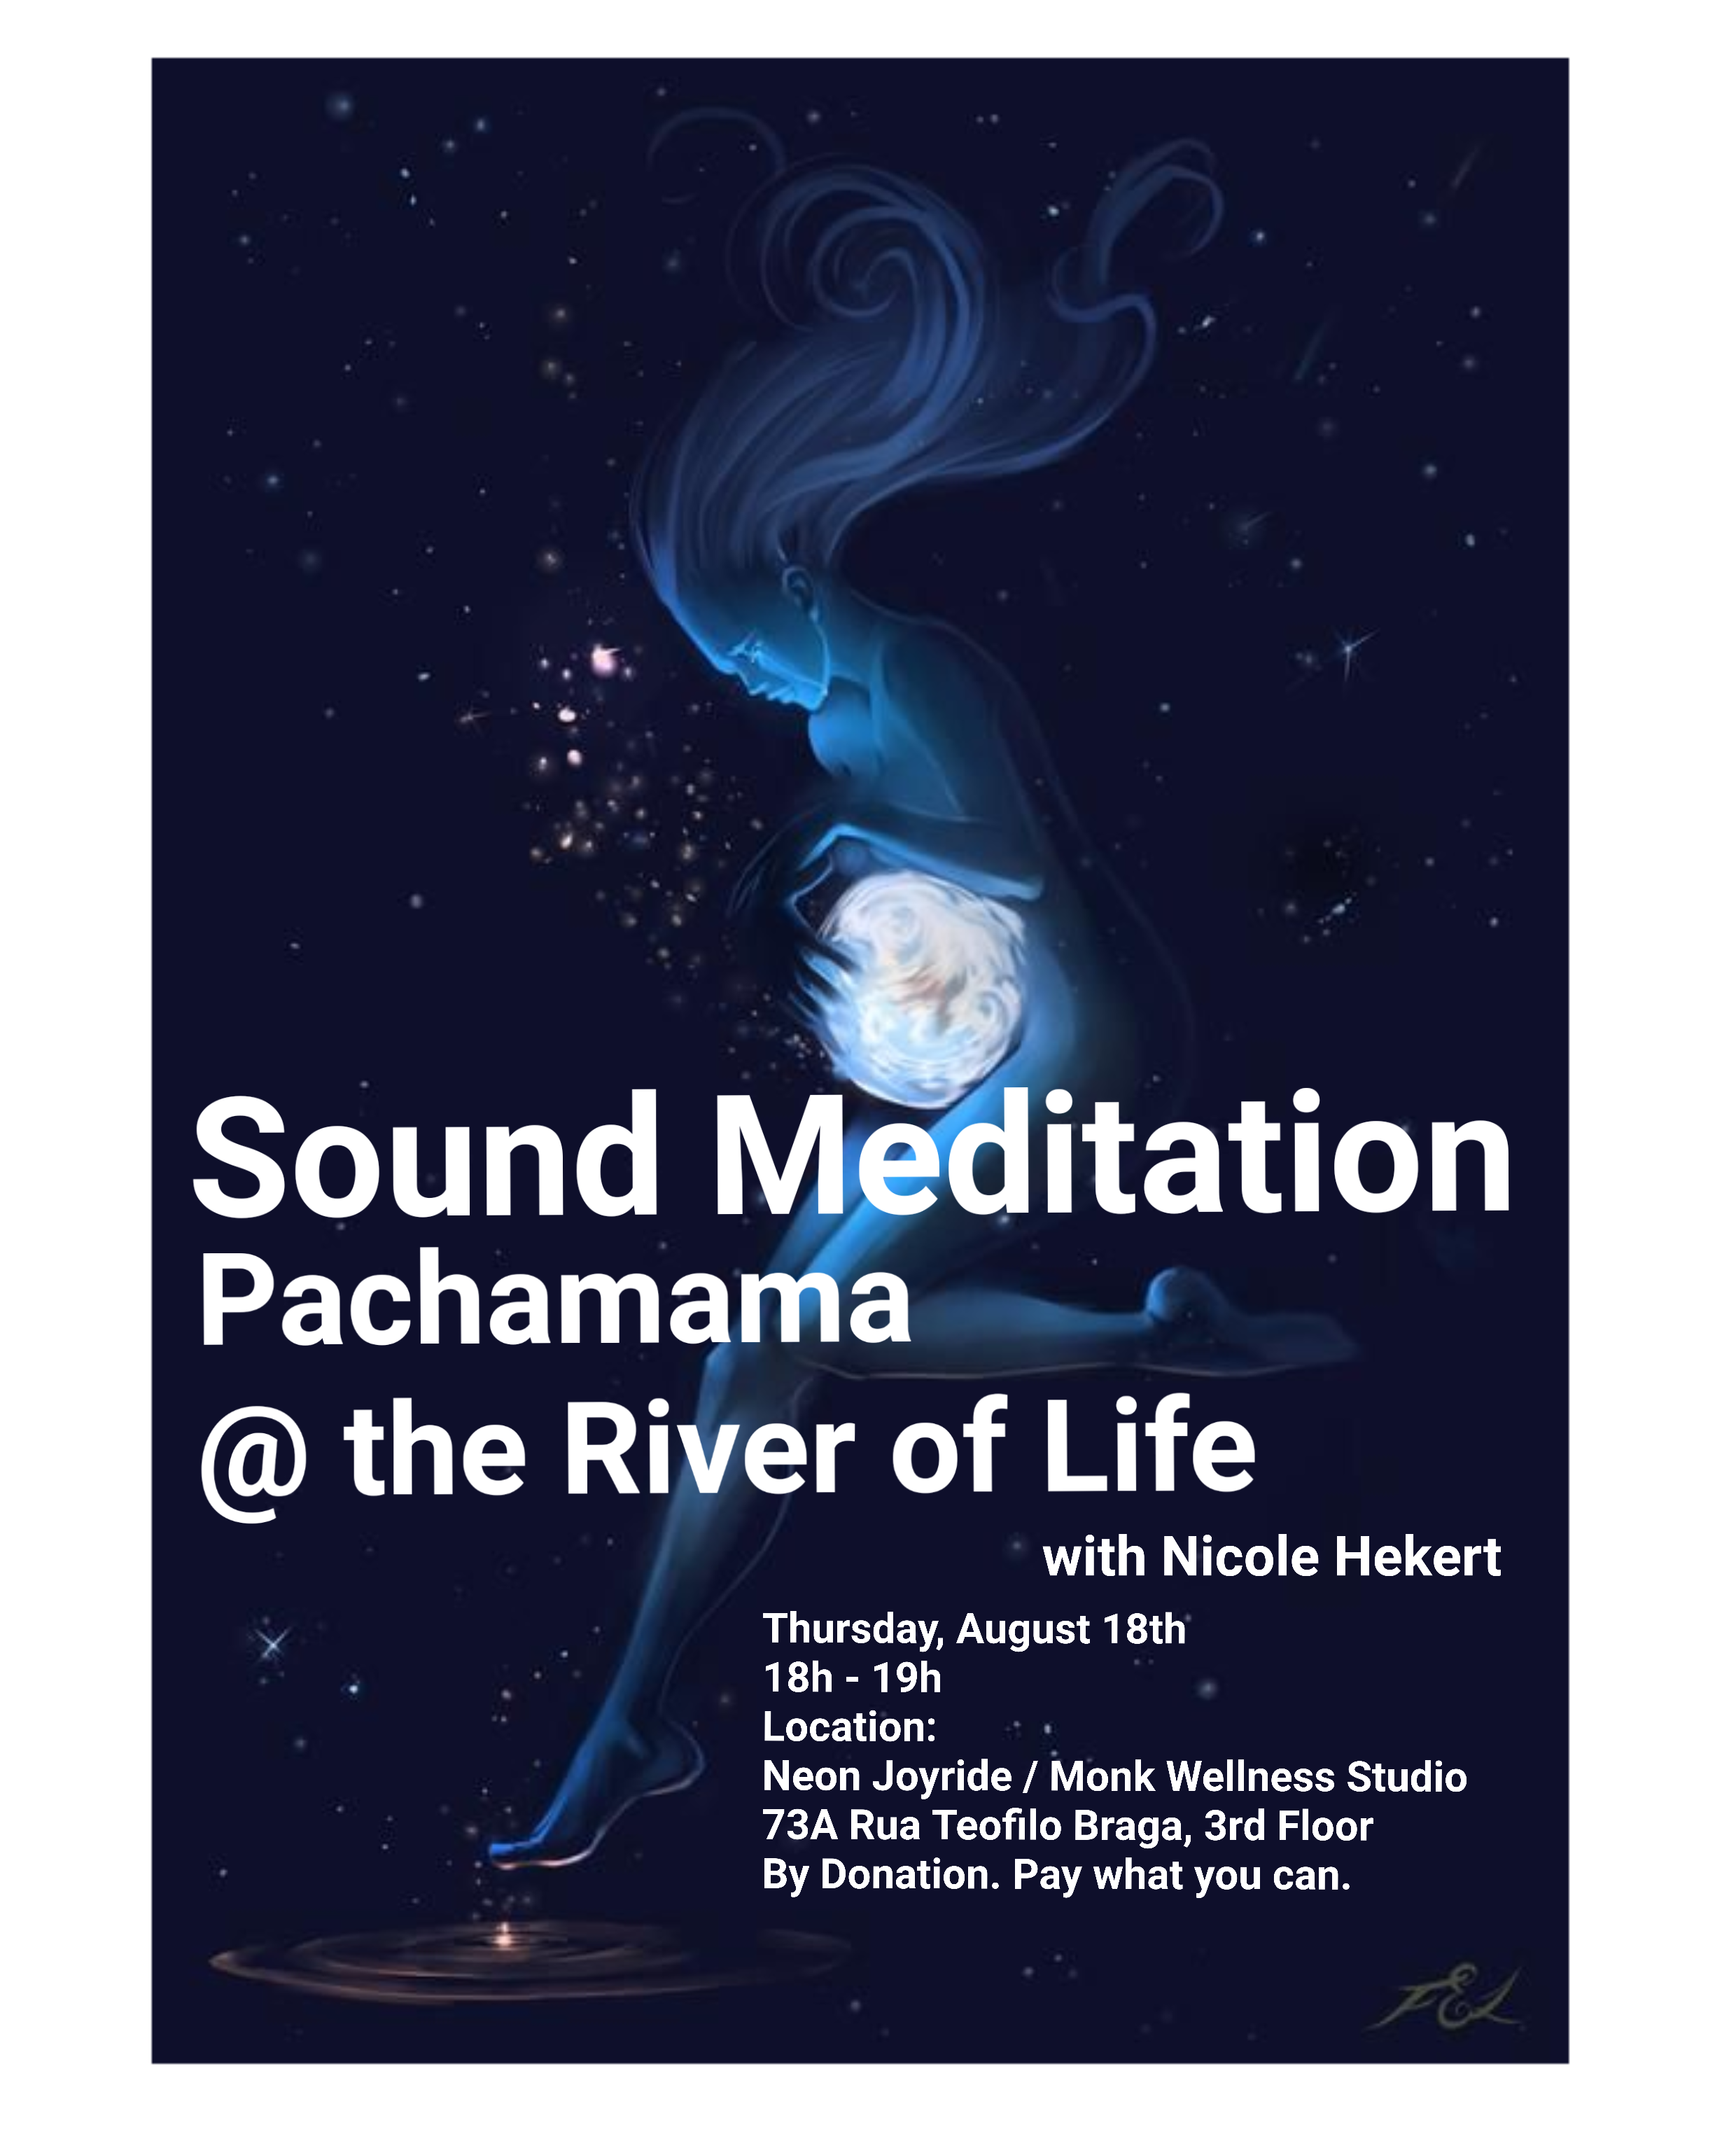 Sound Meditation - Pachamama at the River of Life with Nicole Herkert & Neon Joyride